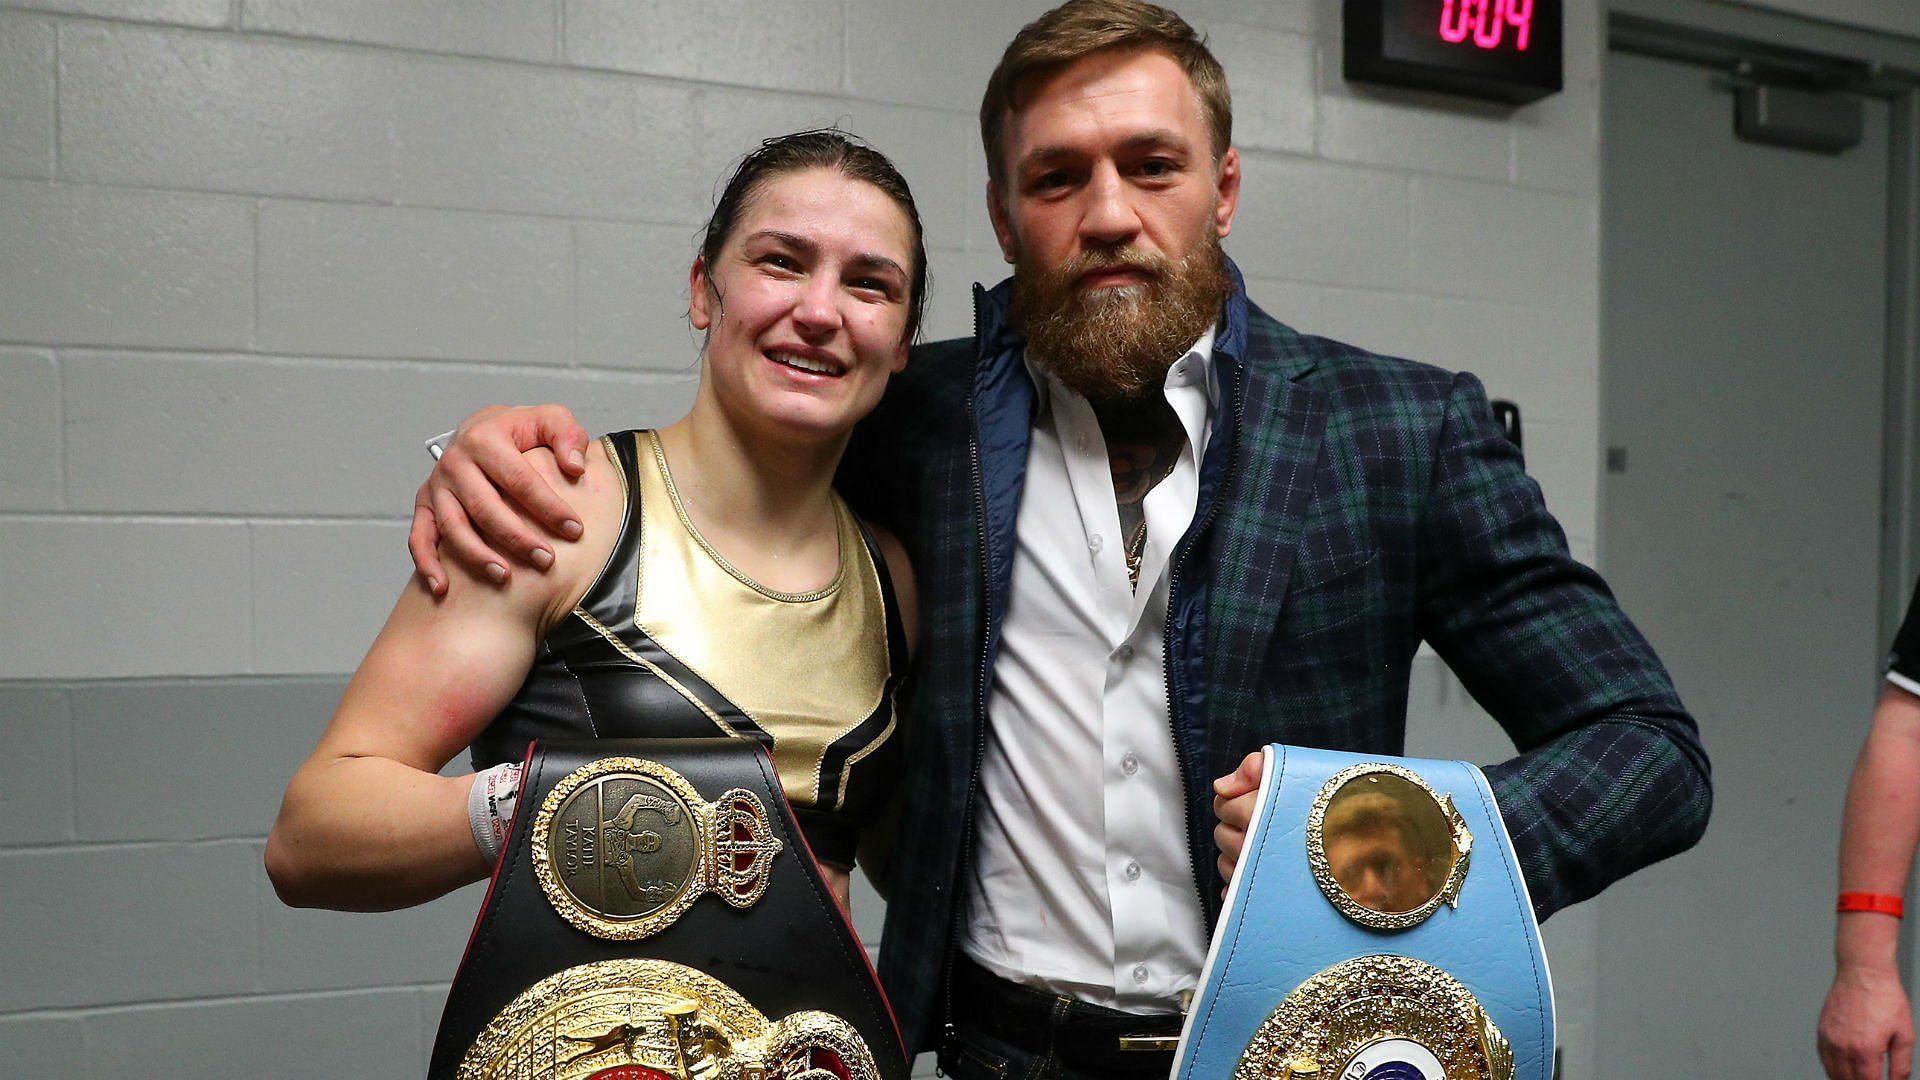 Katie Taylor and Conor McGregor [Image courtesy - Ed Mulholland / Matchroom USA]